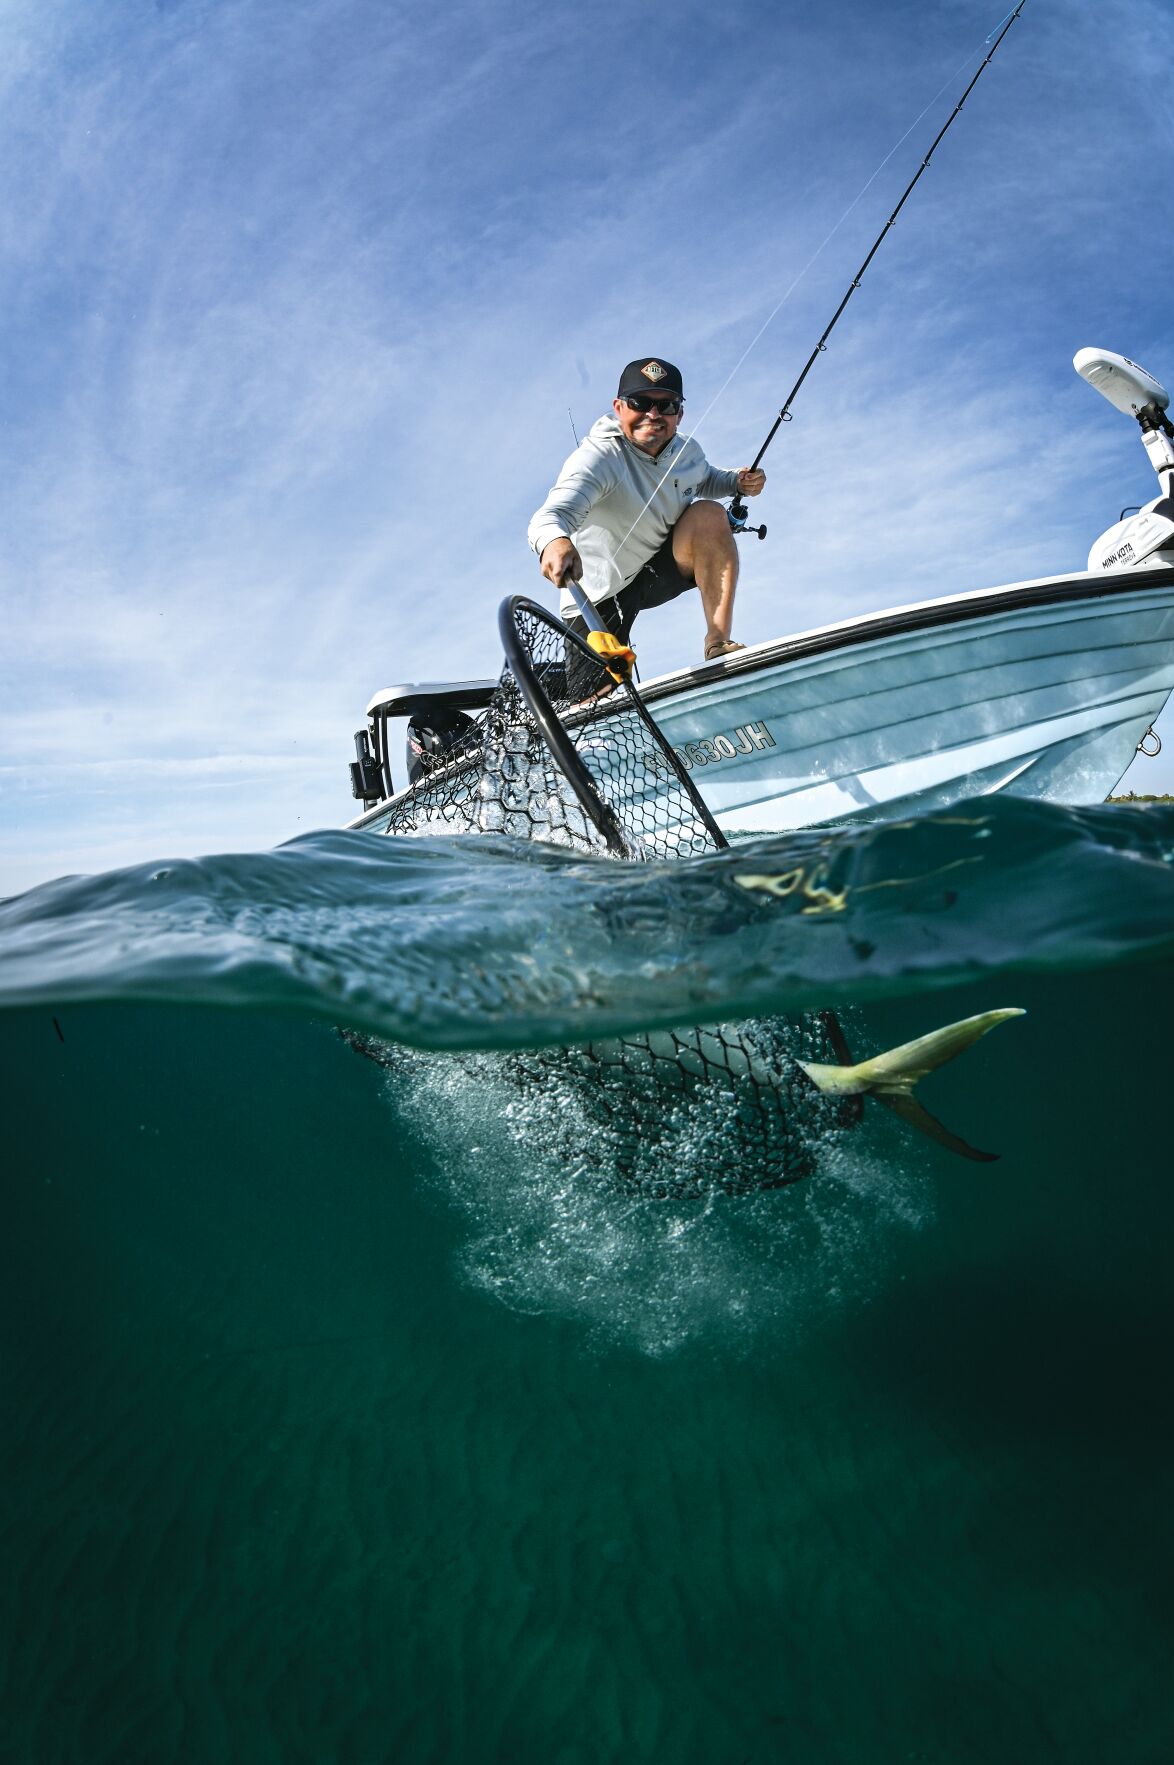 The Most Innovative Fishing Tools and Accessories for Catch